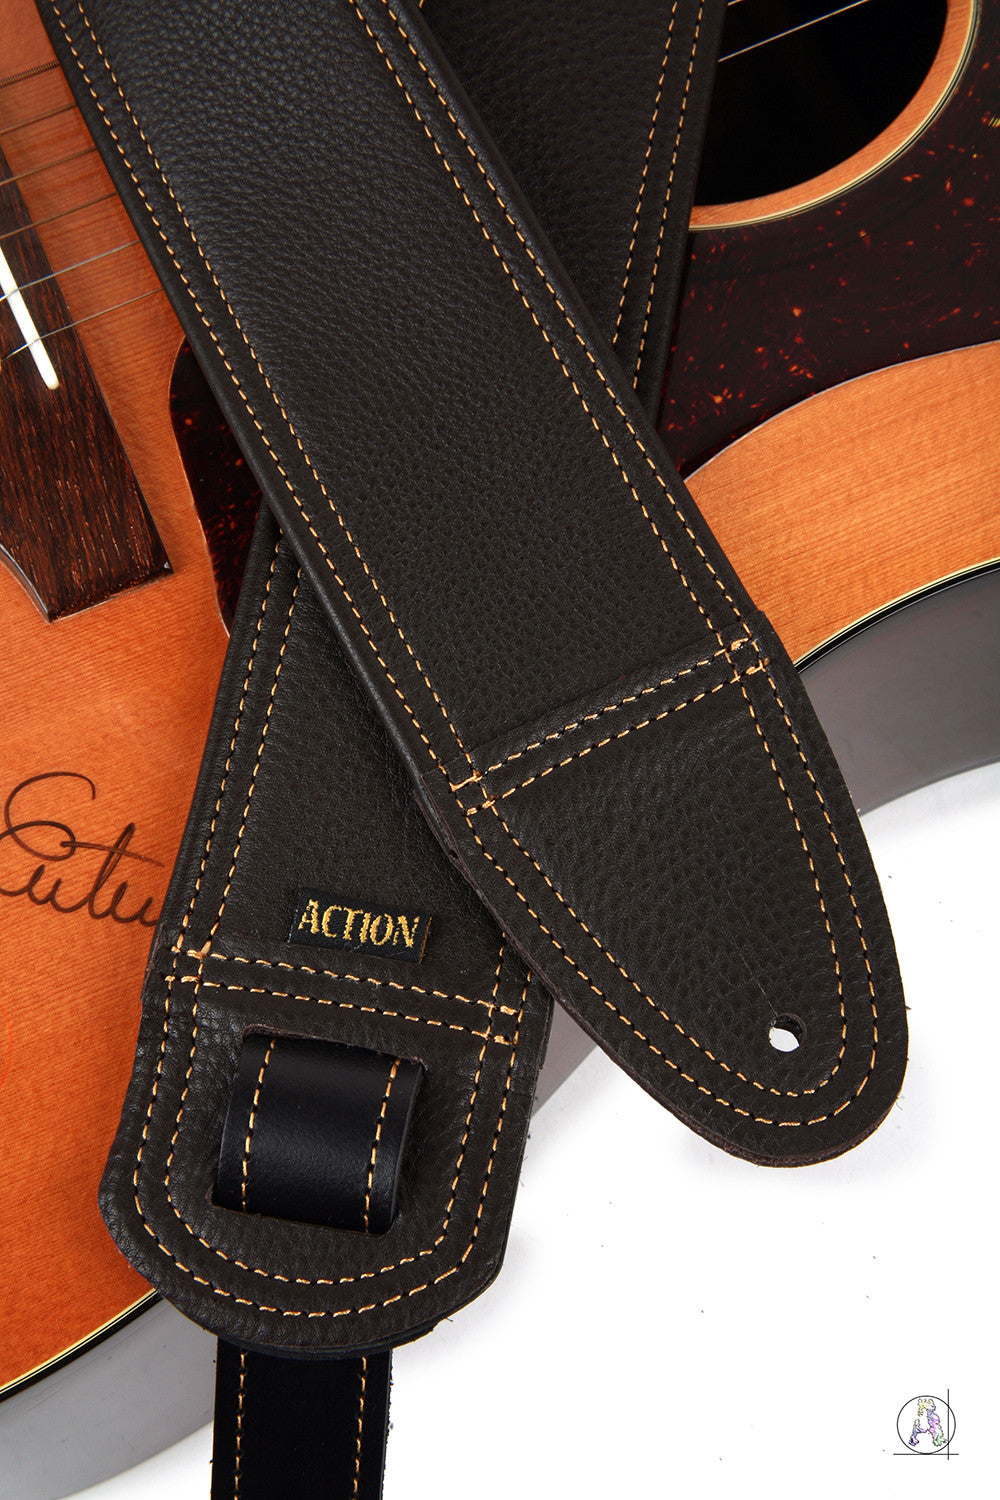 Simply Class Dark Brown with Gold Stitching Custom Guitar Strap